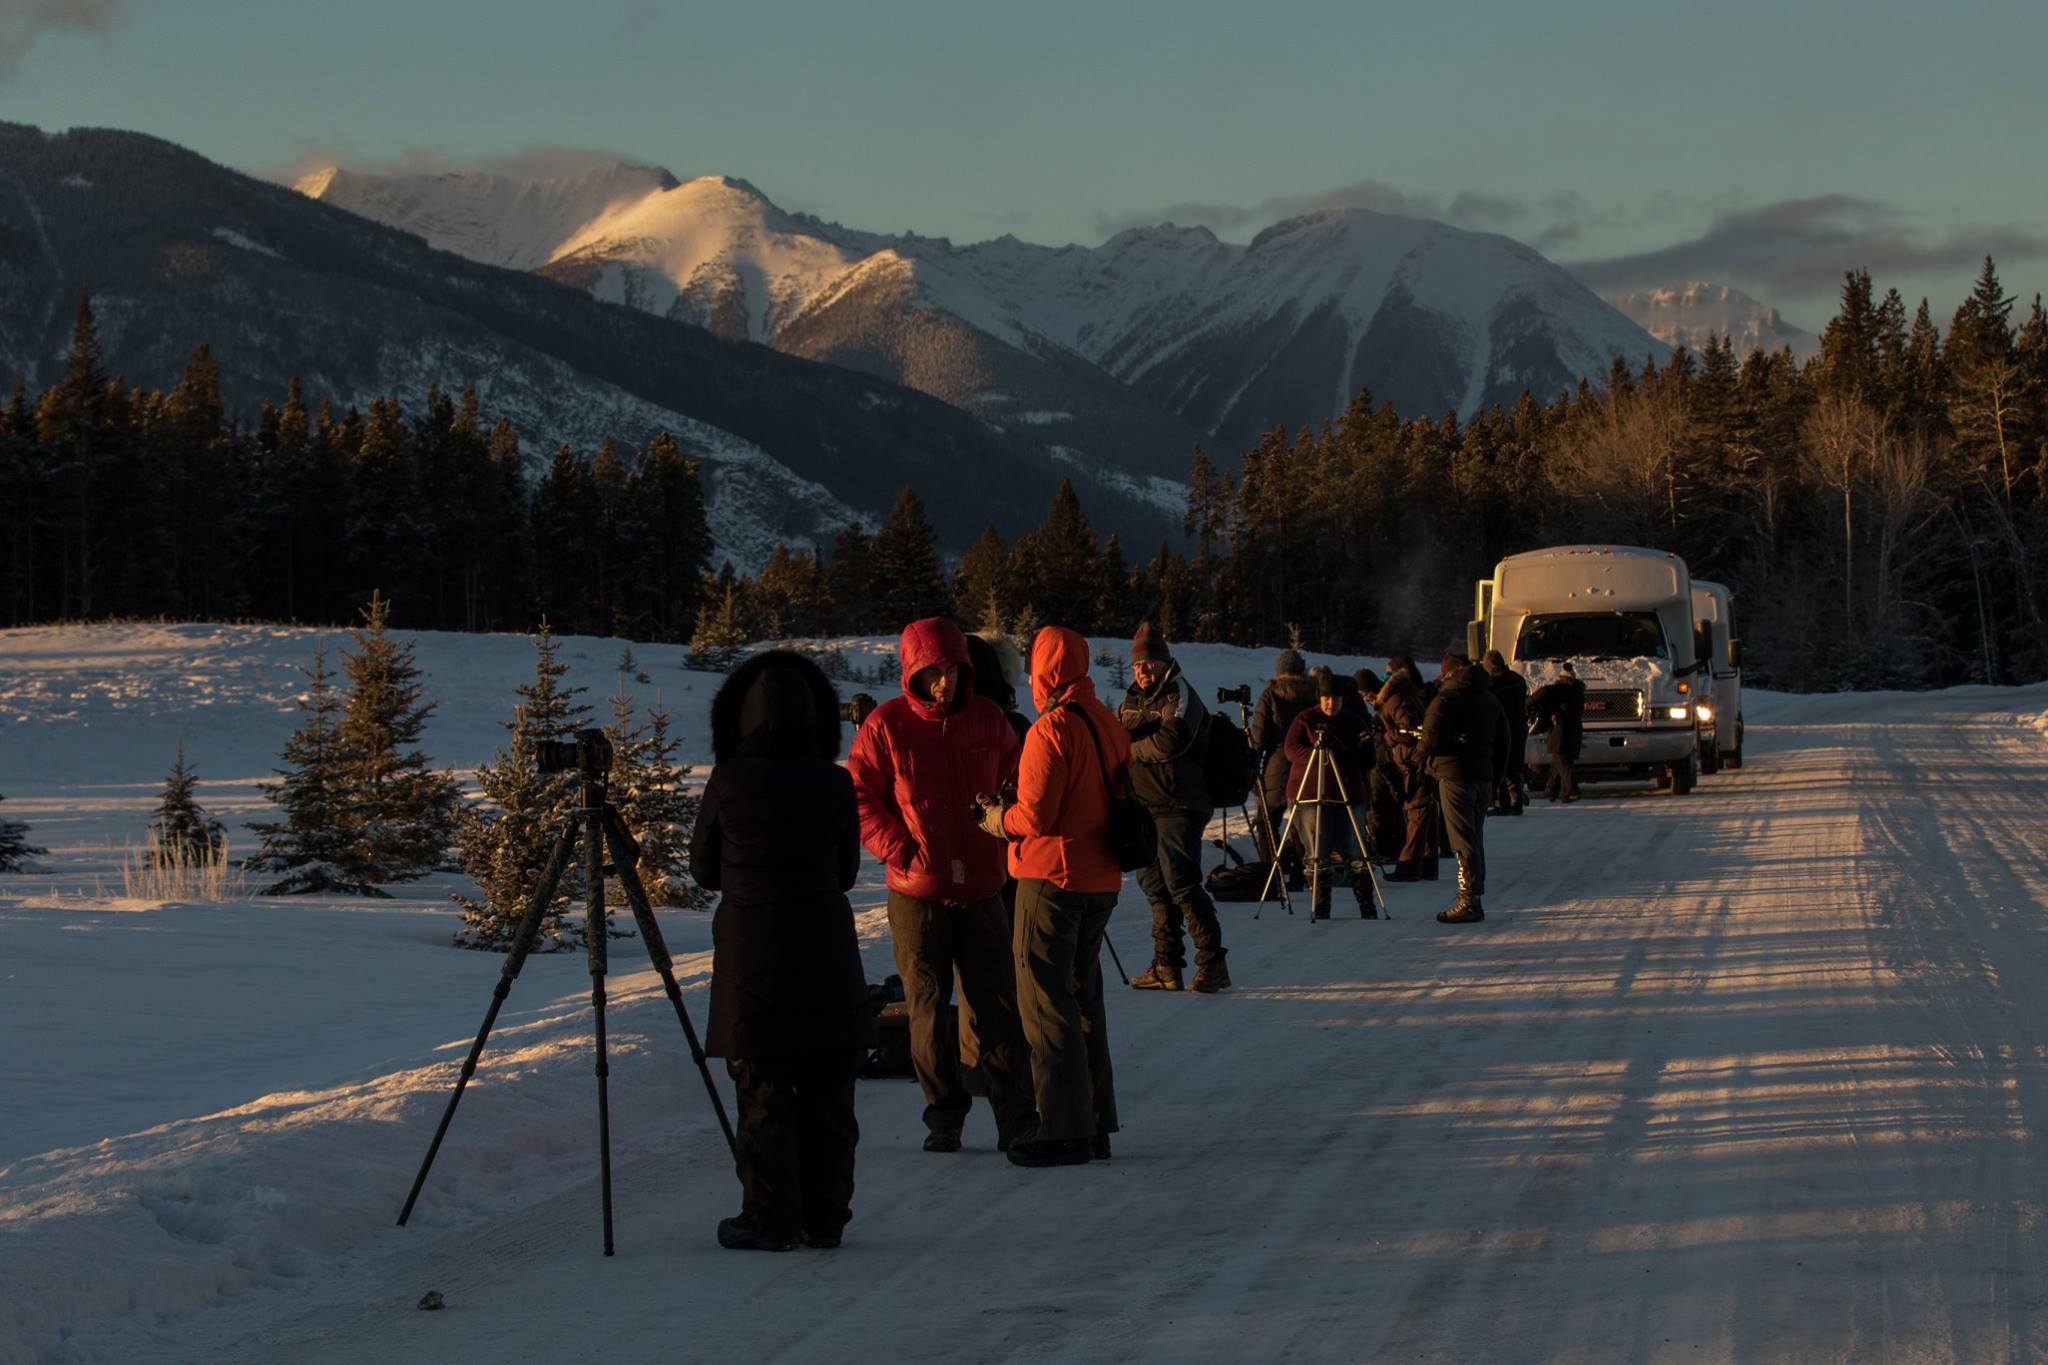 Sunrise during one of the Banff national Park Tours during the 2016 Summit